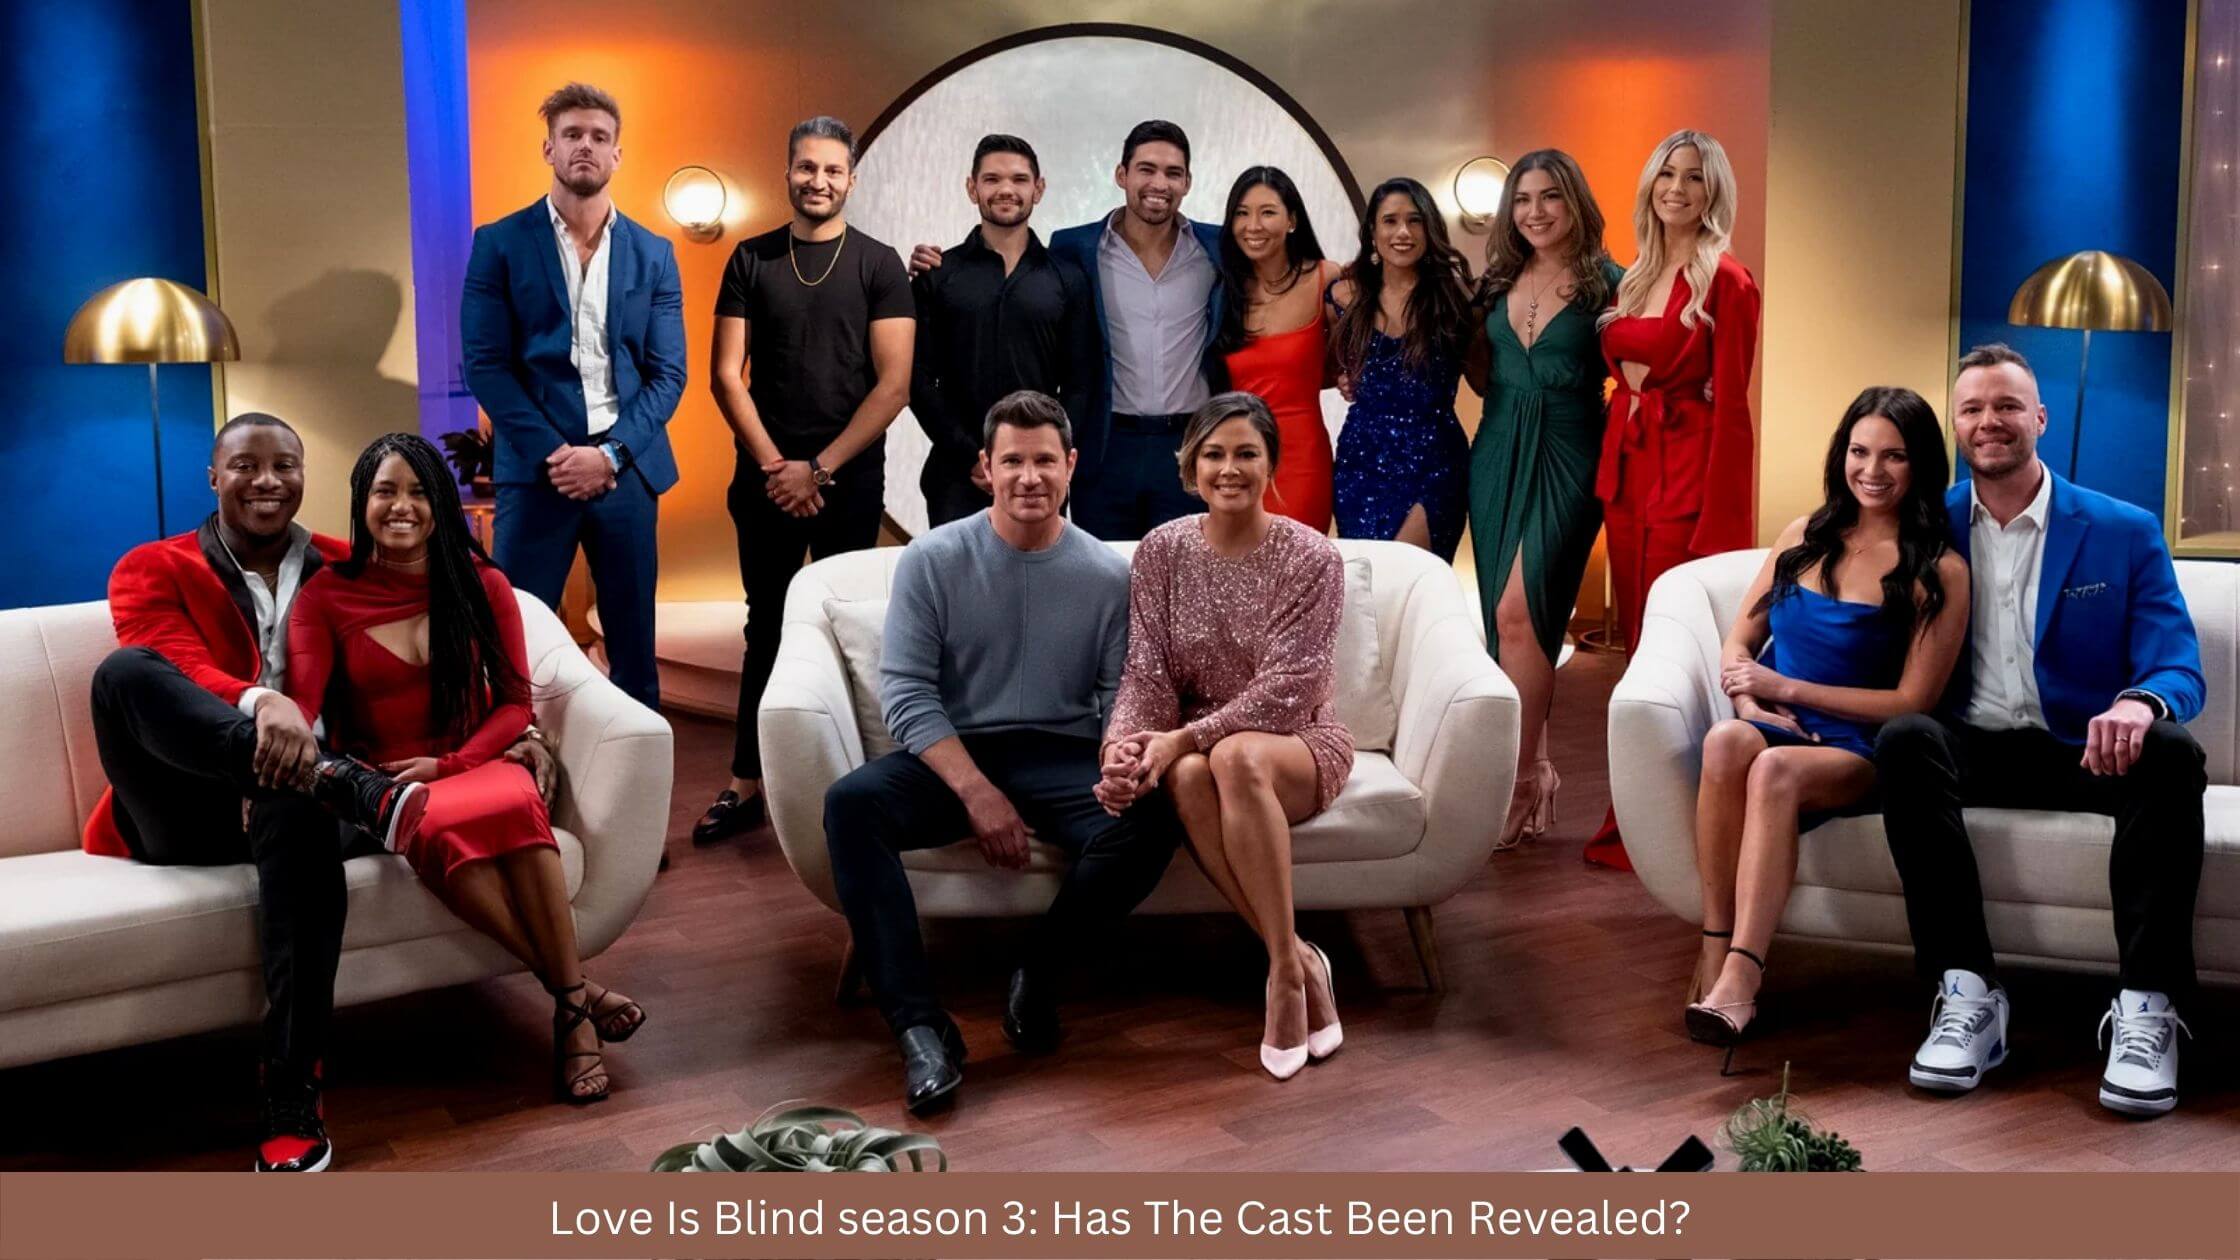 Love Is Blind season 3: Potential Release Date Updates? Has The Cast Been Revealed?